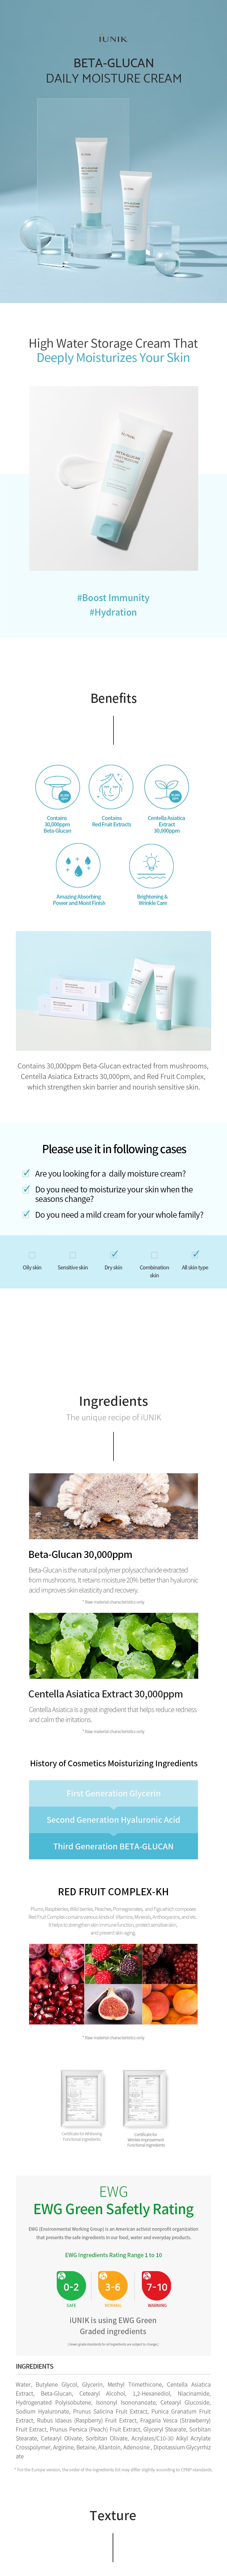 Pamphlet image of Beta Glucan Daily Moisture Cream (1)